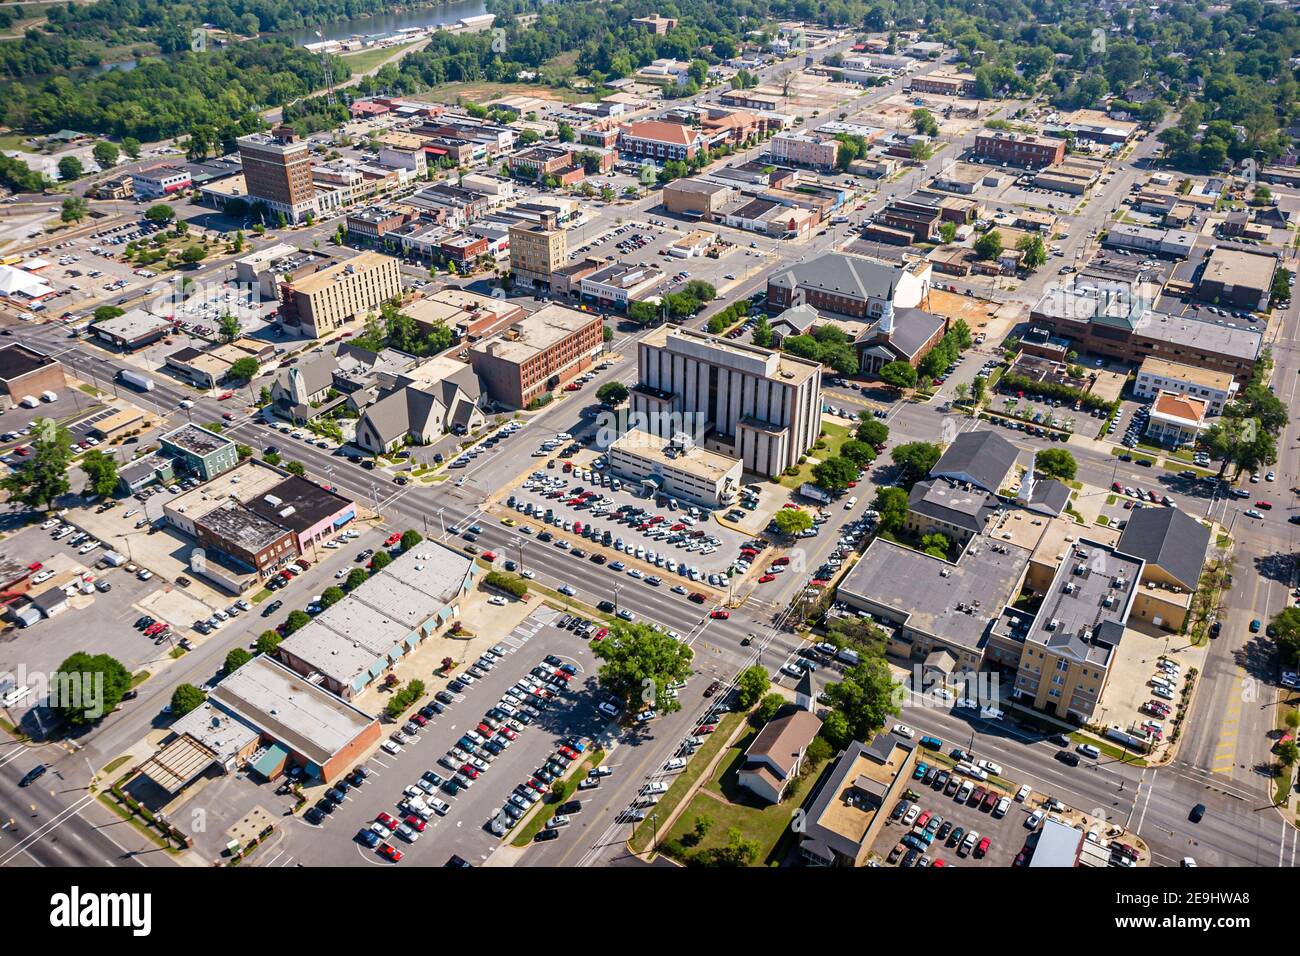 Tuscaloosa Alabama,downtown city center centre,aerial overhead view business district, Stock Photo